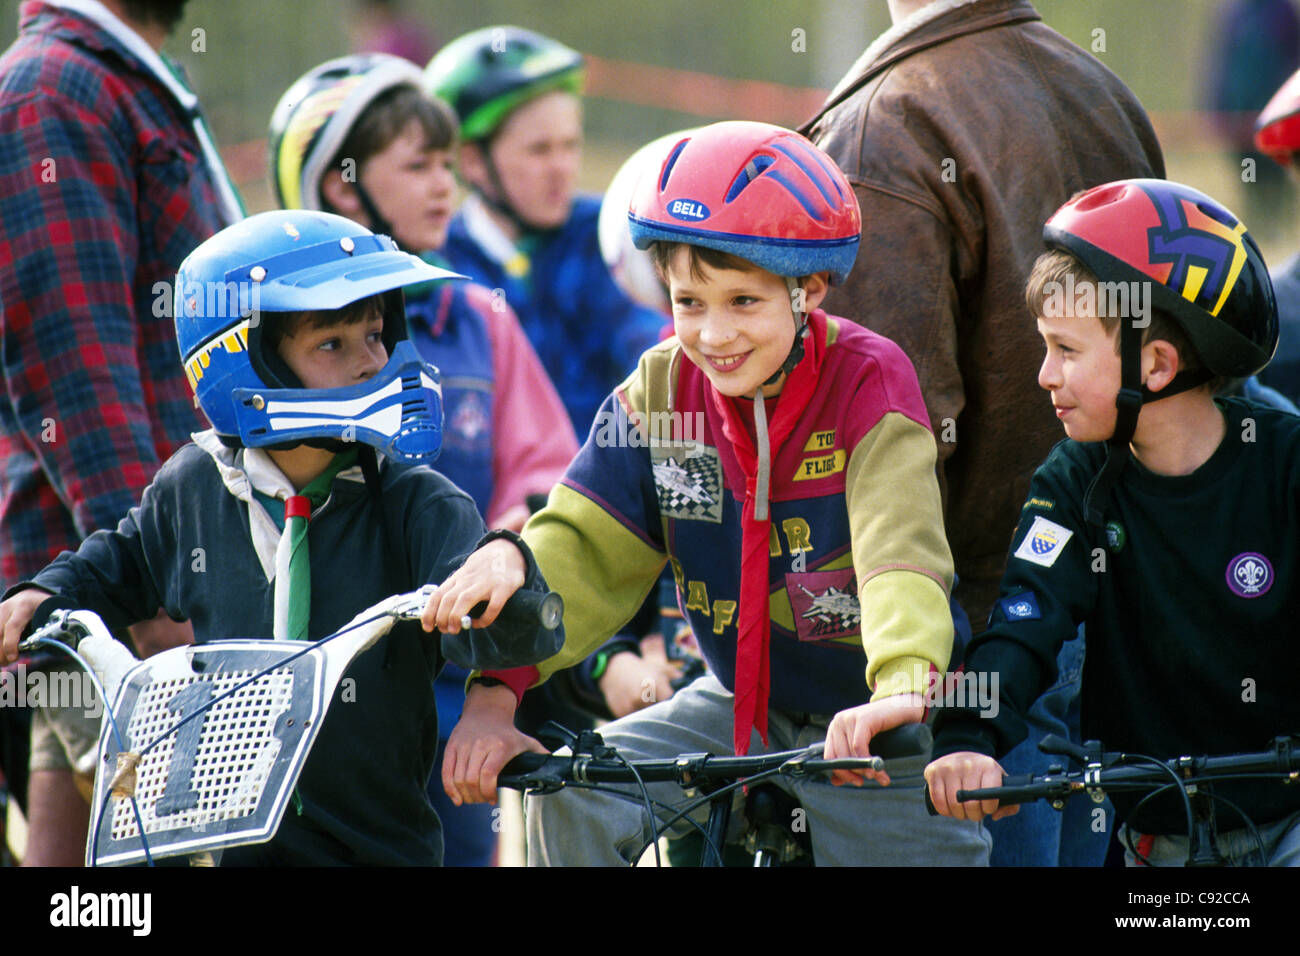 Generic images of children playing on bikes wearing safety helmets (photographer has statutory approval to work with children) for general editorial use Stock Photo